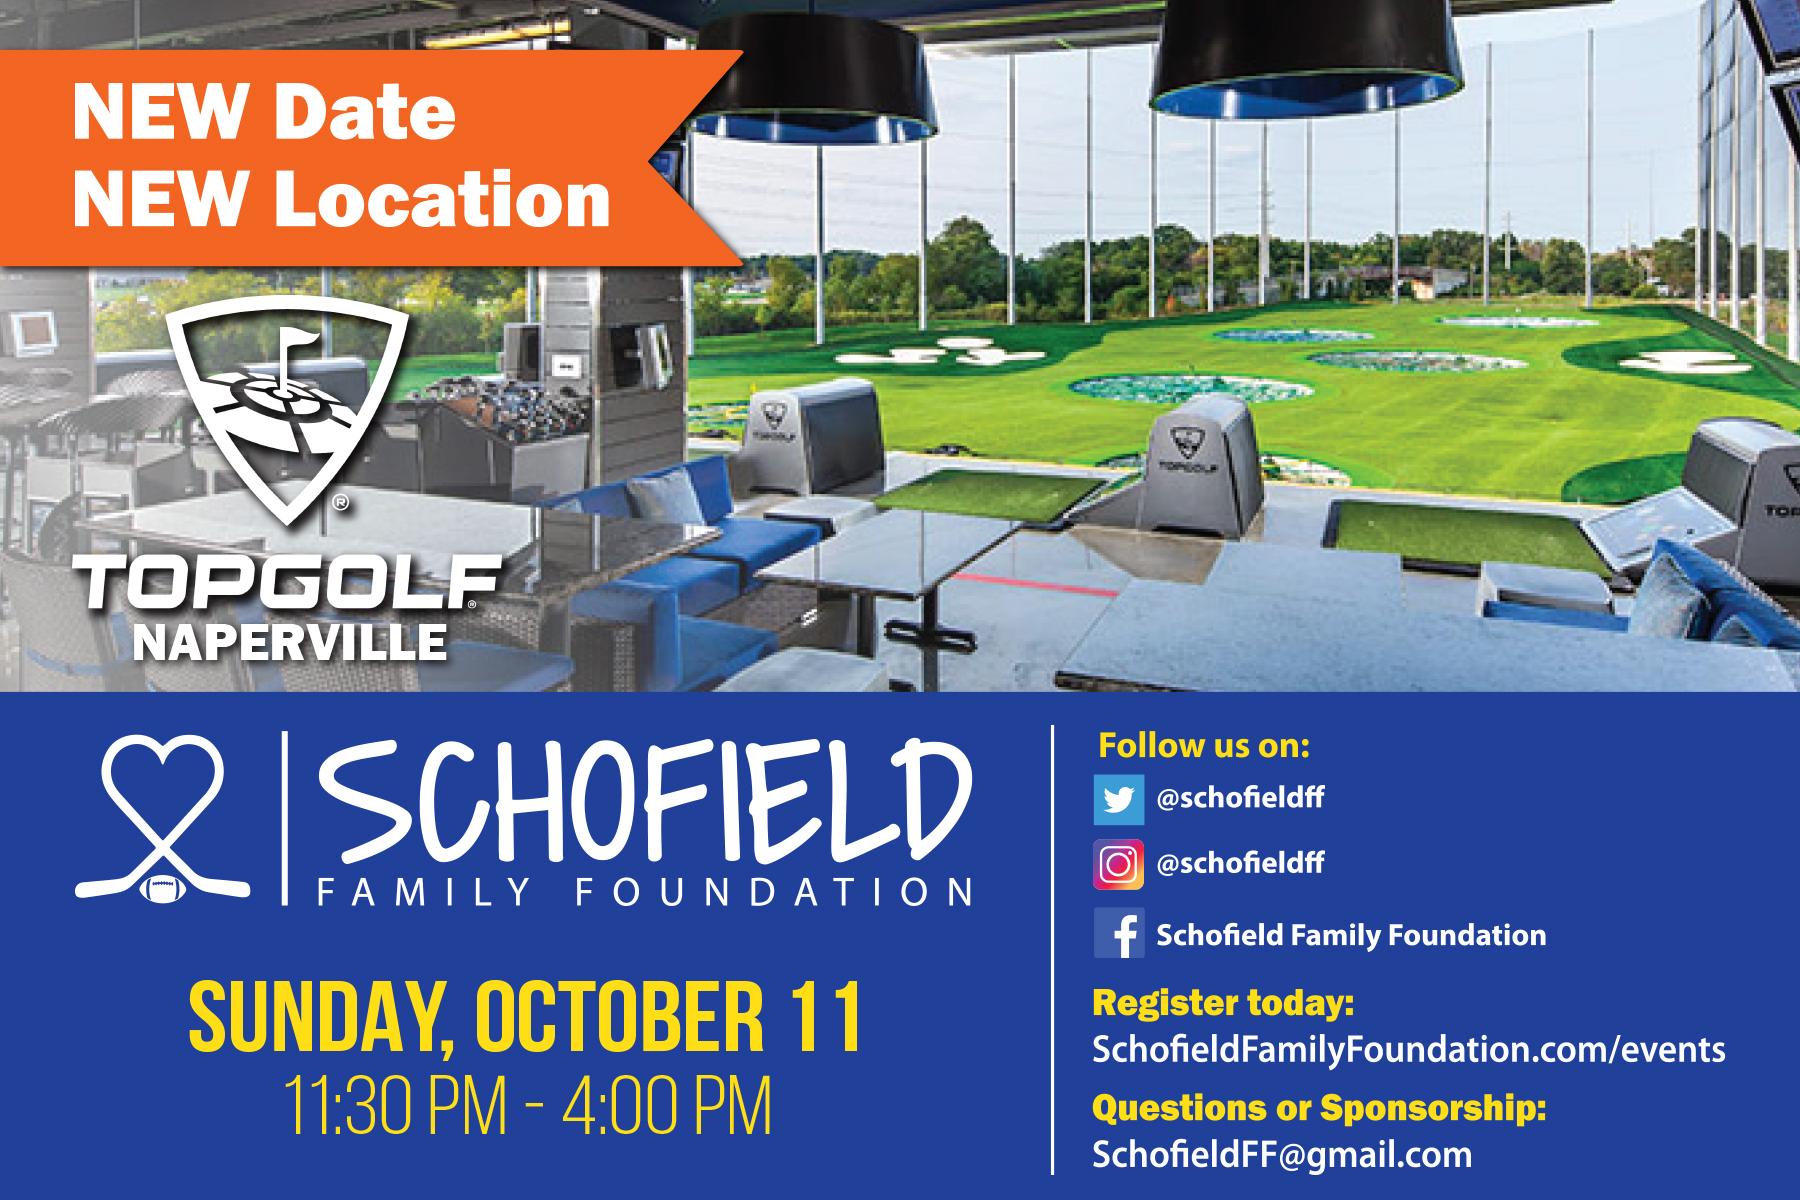 The Schofield Family Foundation A Couple of Champions Fundraiser at Topgolf